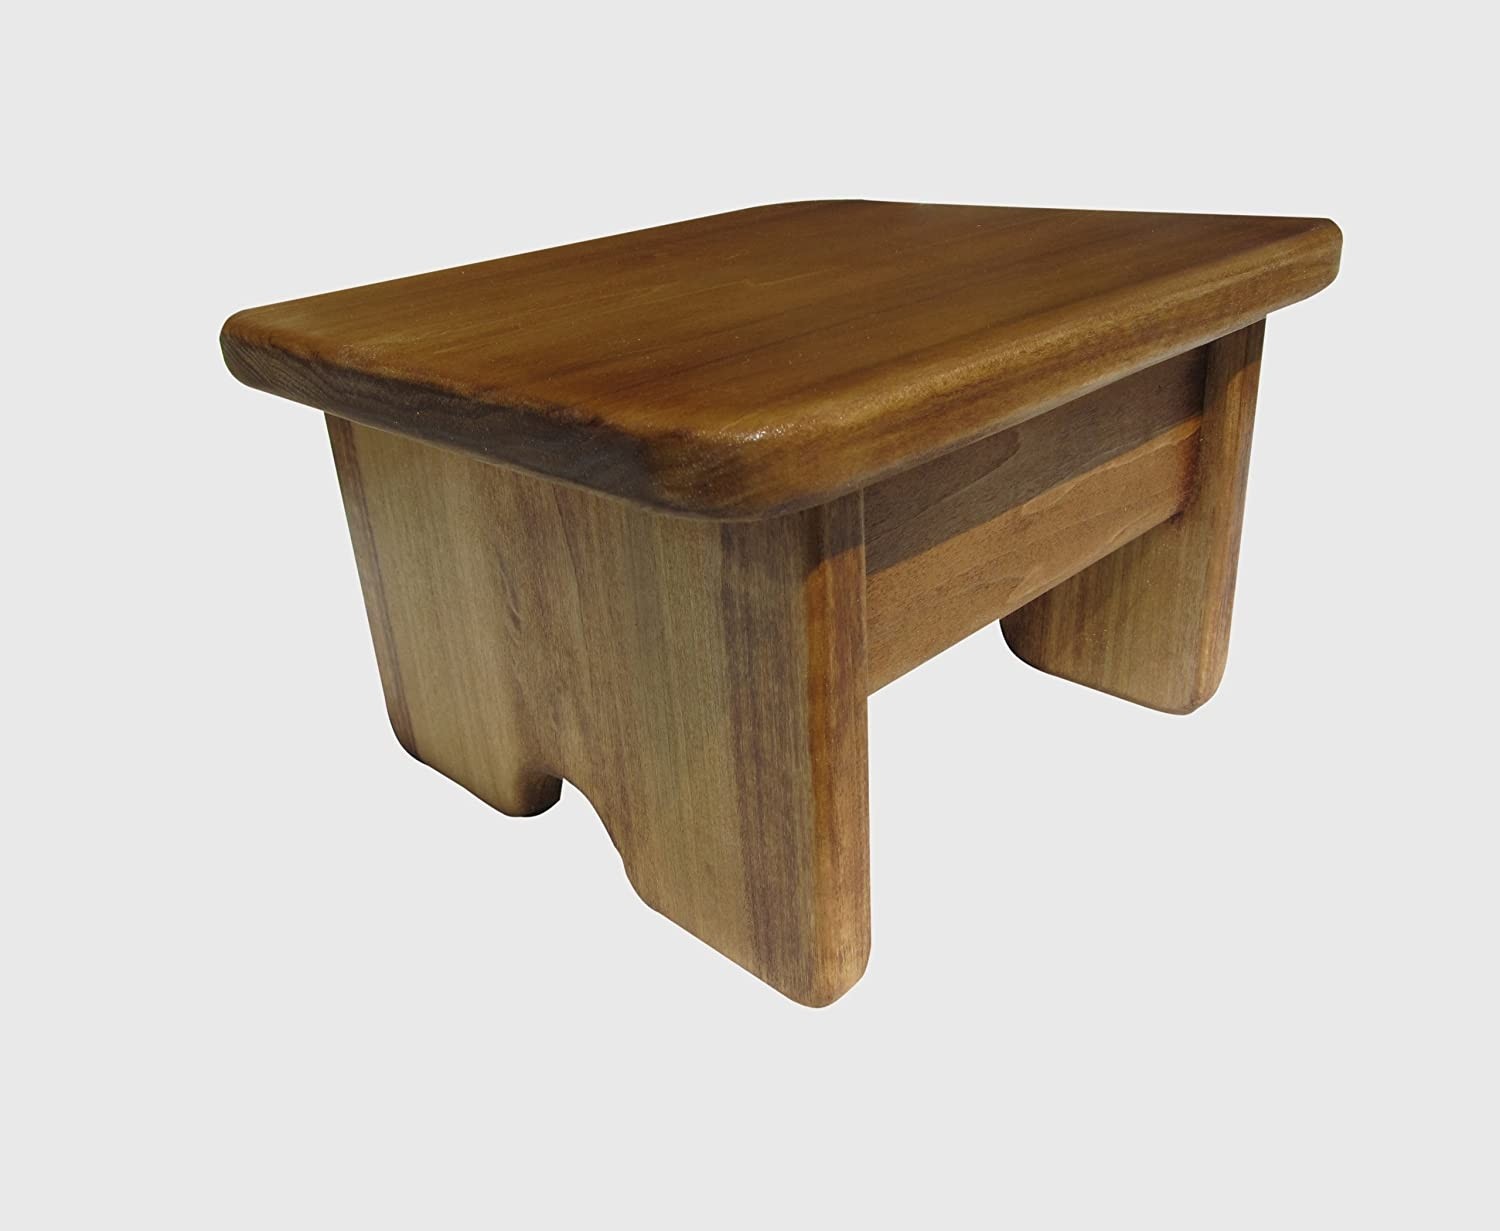 Foot Stool Poplar Wood Maple Stain 6" Tall Mini (Made in the USA)